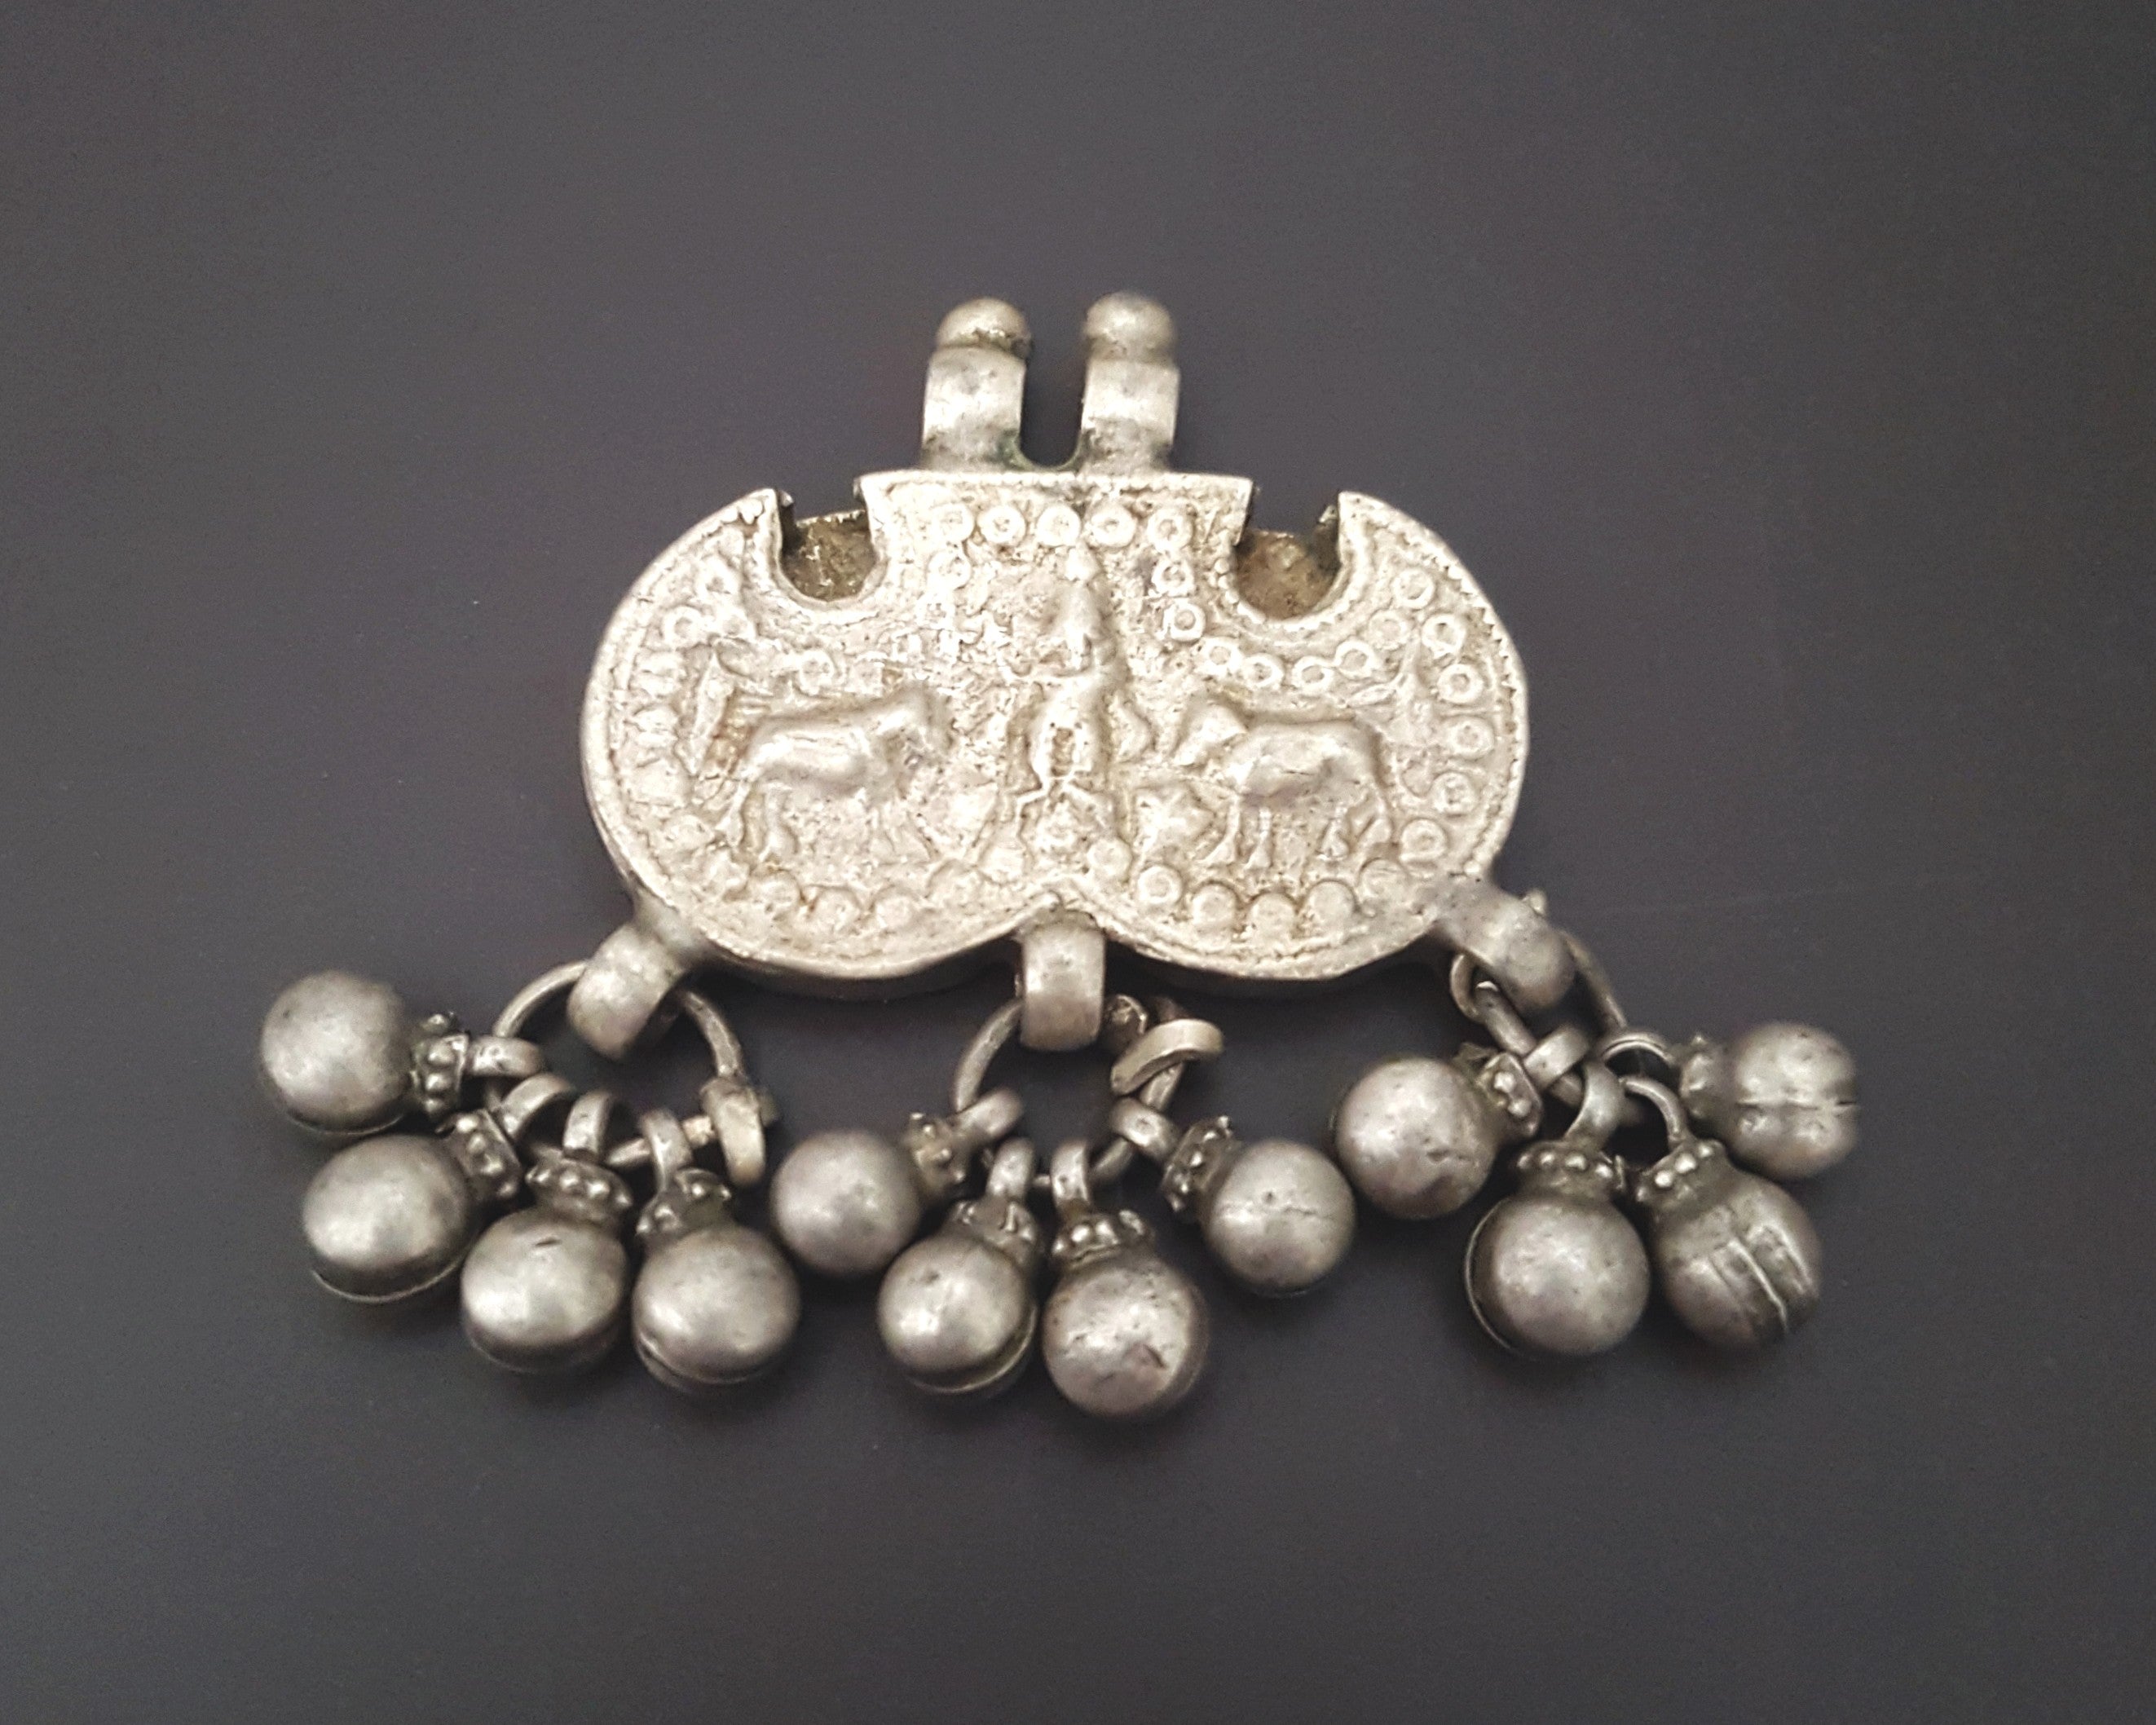 Rajasthani Silver Pendant with Bells